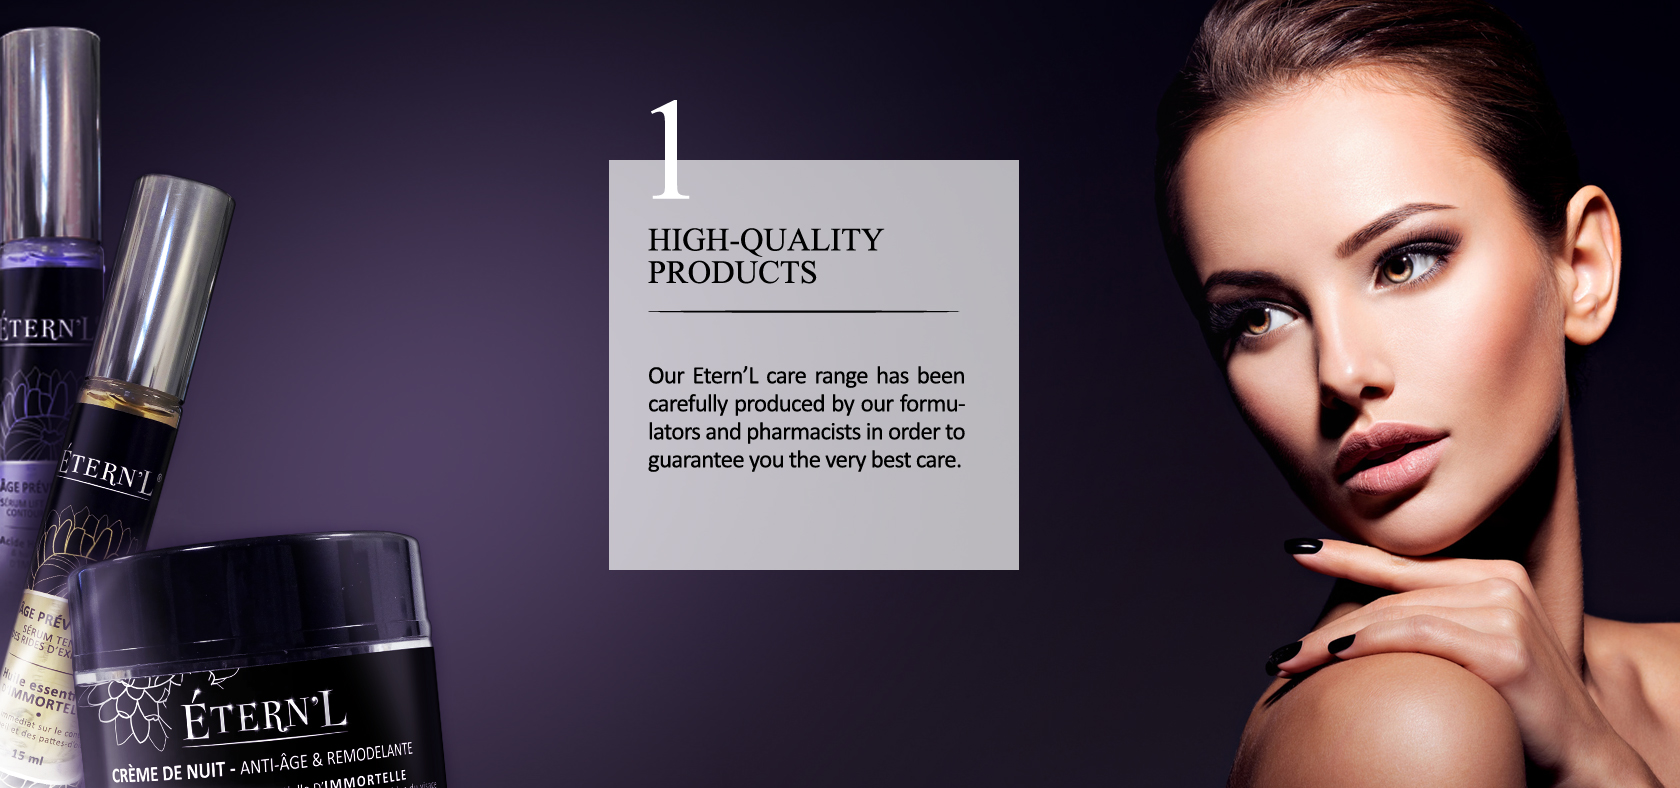 Éternel commitment #1: high-quality care products